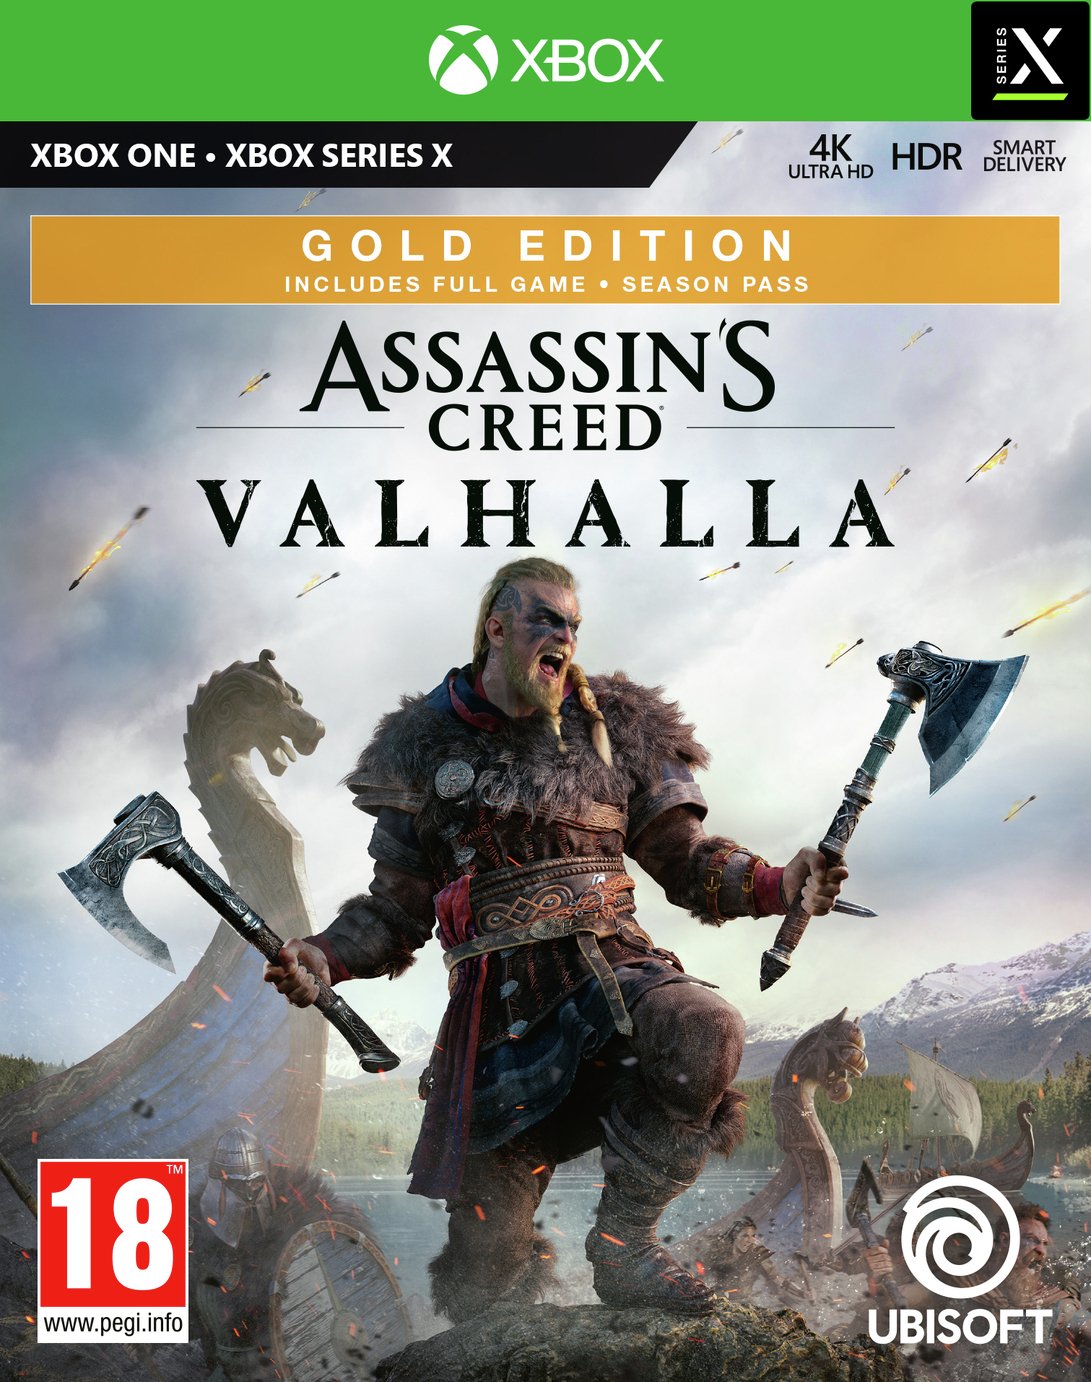 Assassin's Creed Valhalla Gold Edn Xbox One Game Pre-Order Review